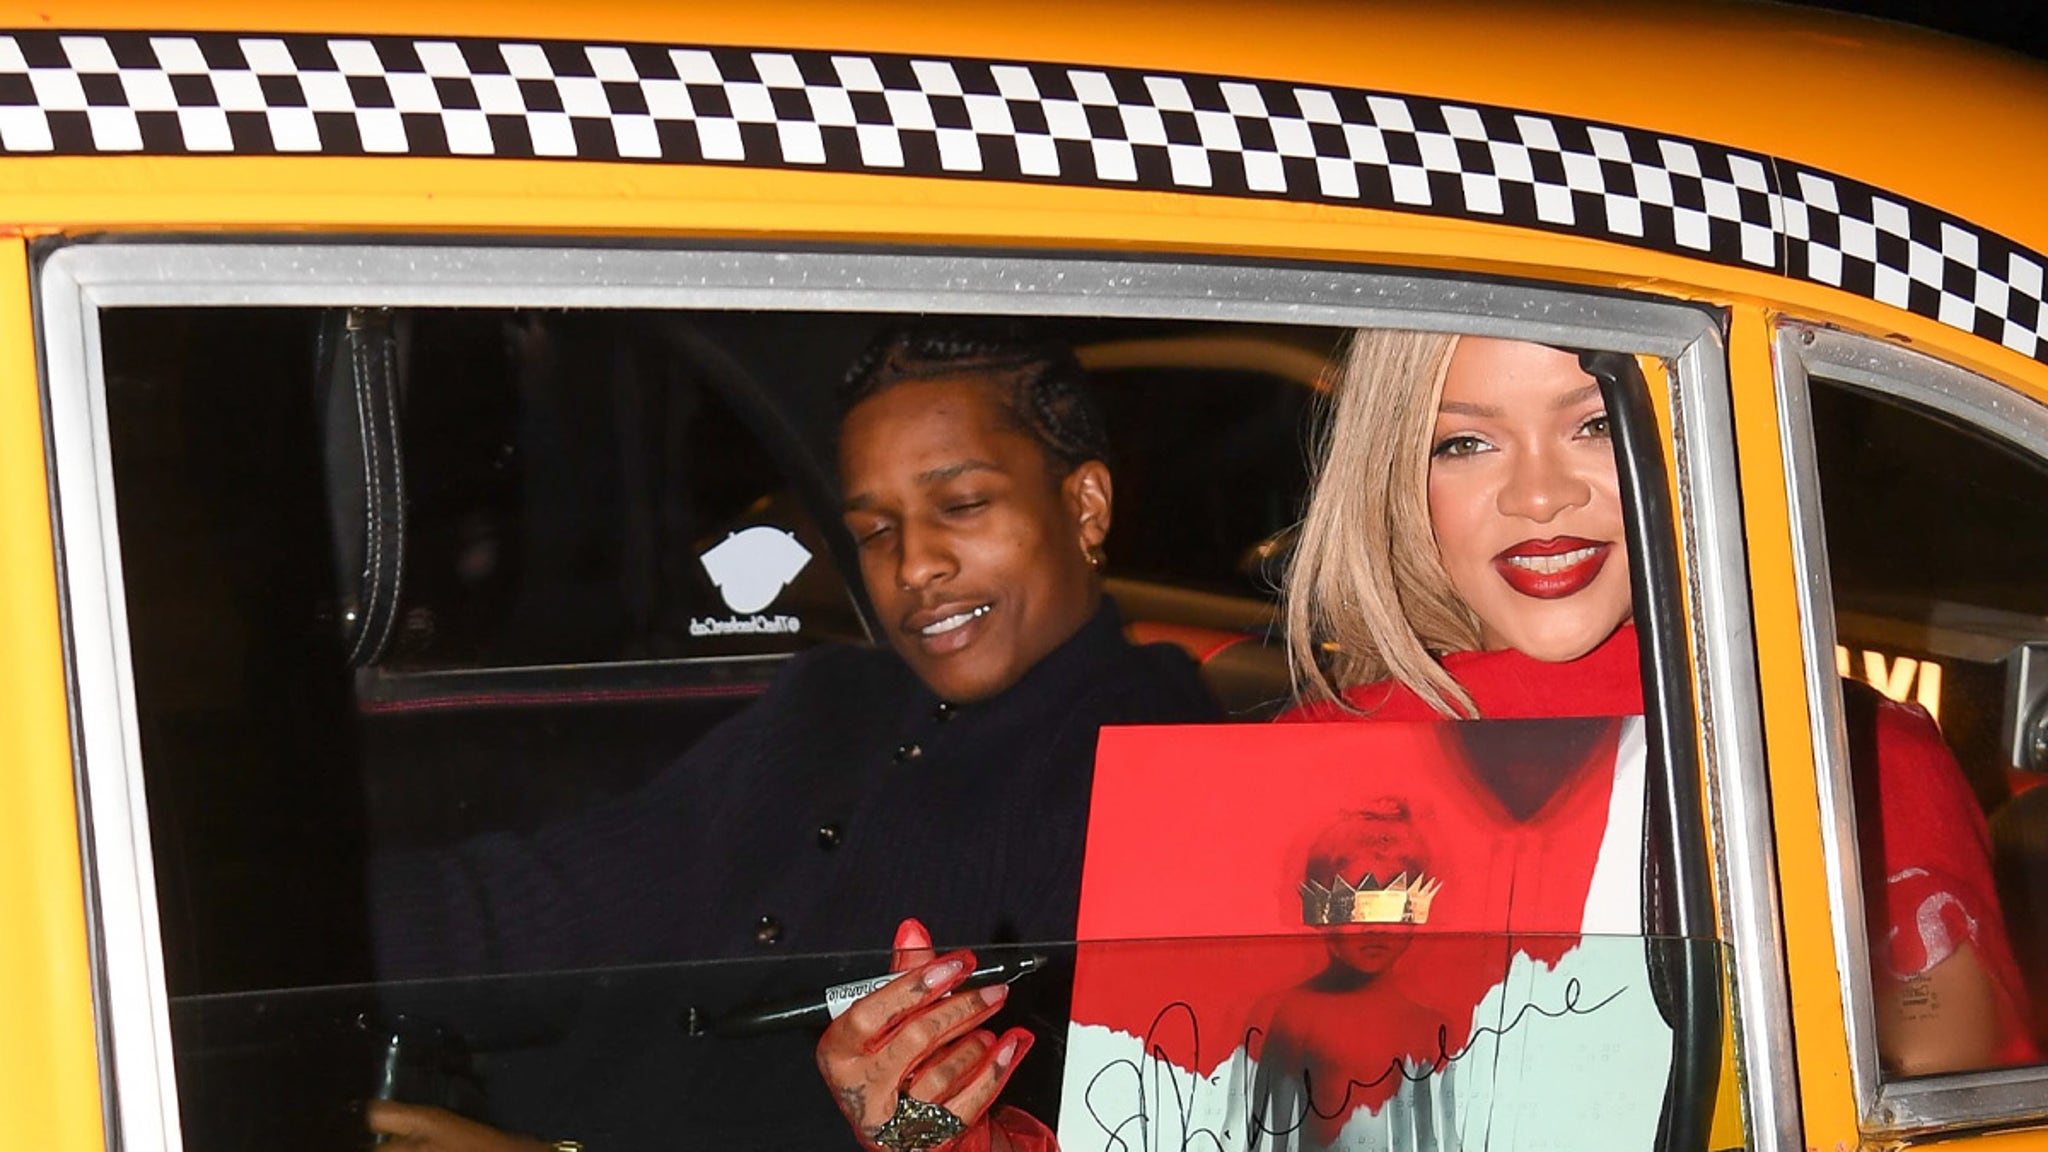 Rihanna and A$AP Rocky Board an old-fashioned yellow cab in New York City for Mother’s Day